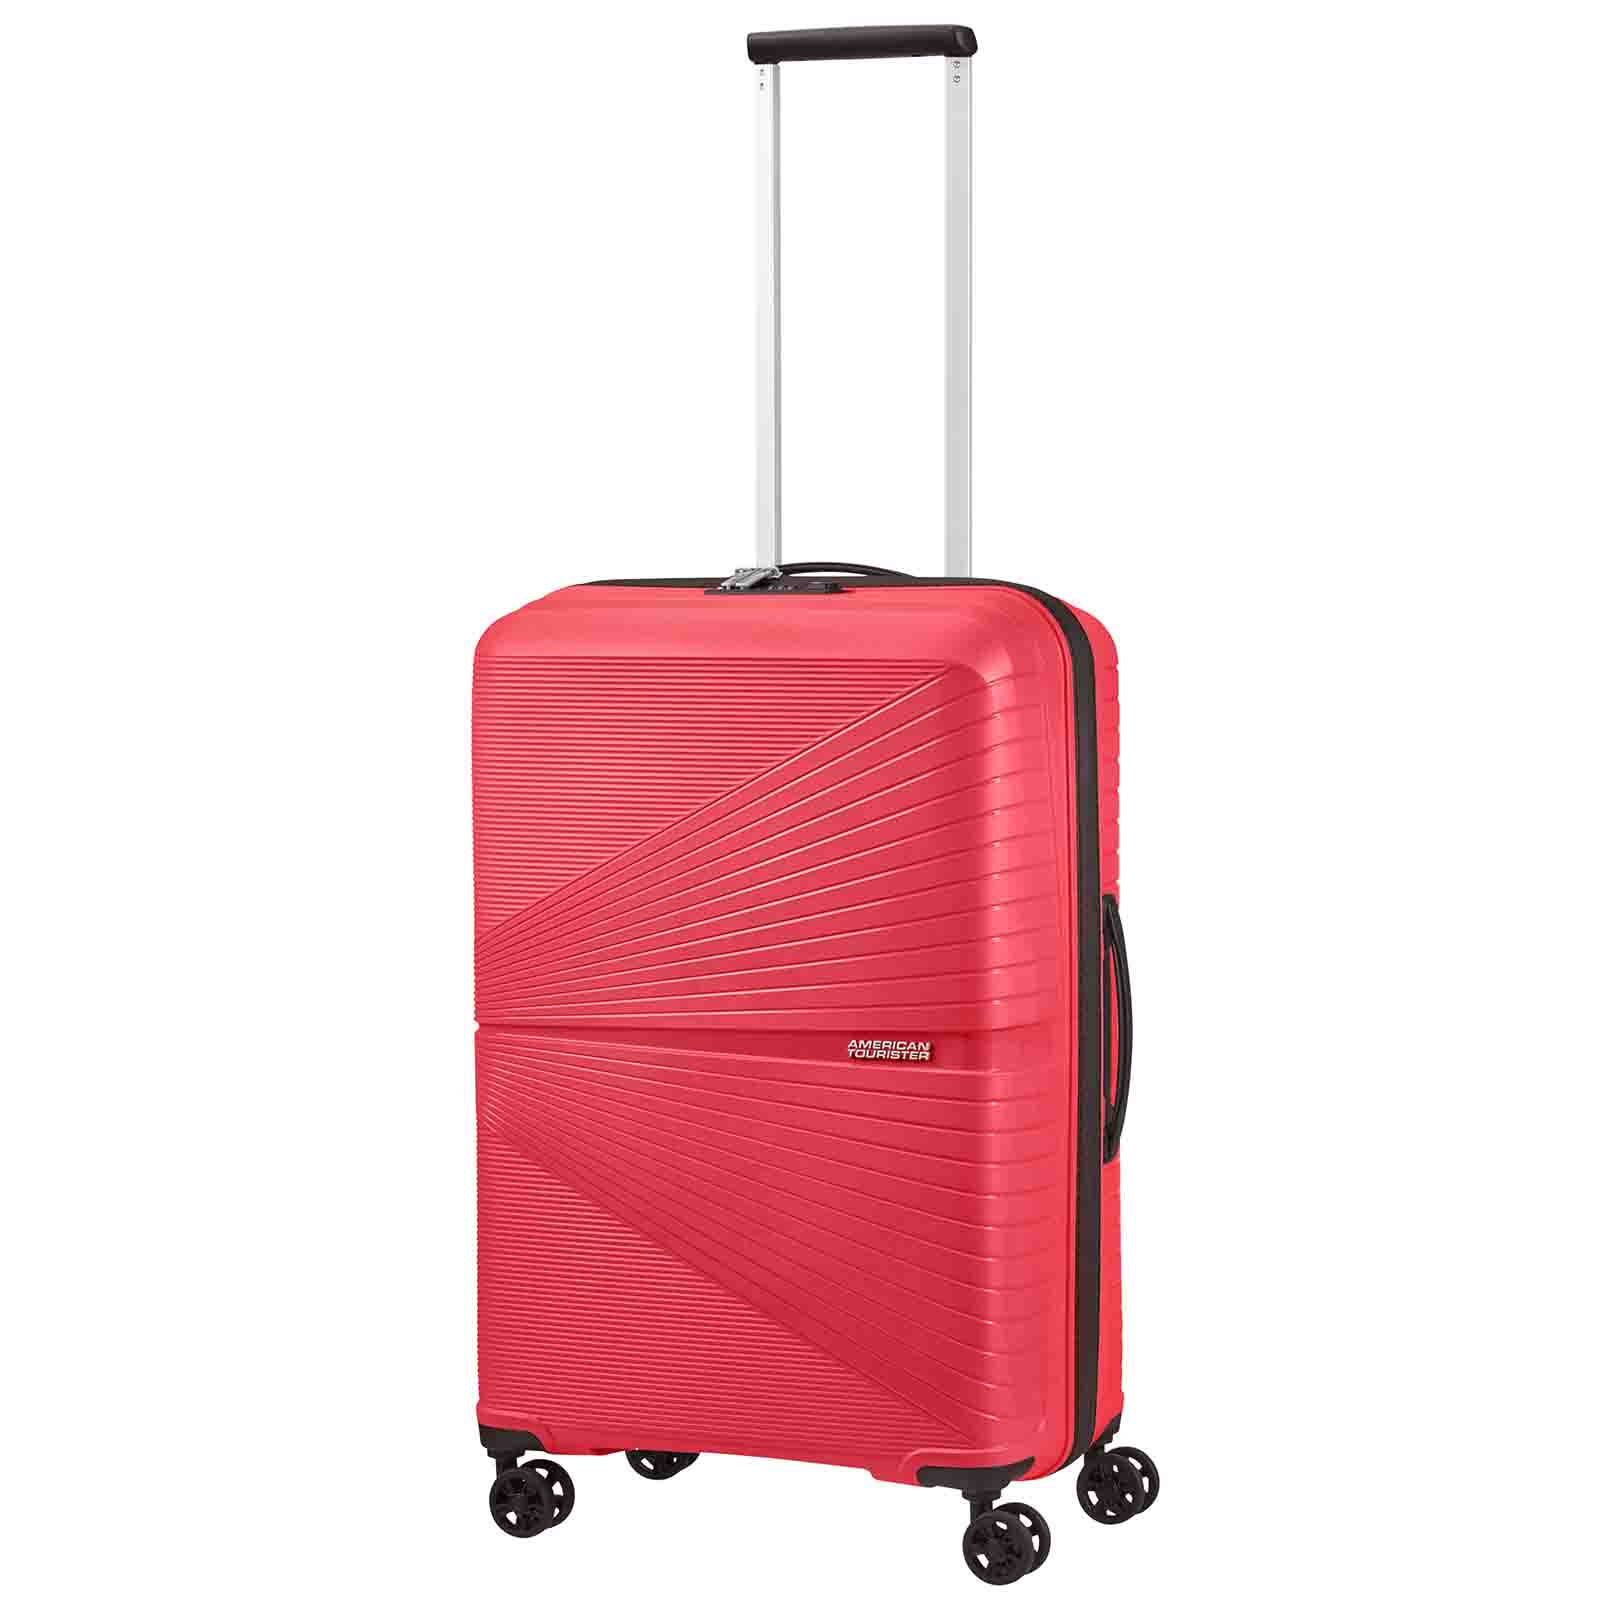 American-Tourister-Airconic-67cm-Suitcase-Paradise-Pink-Trolley